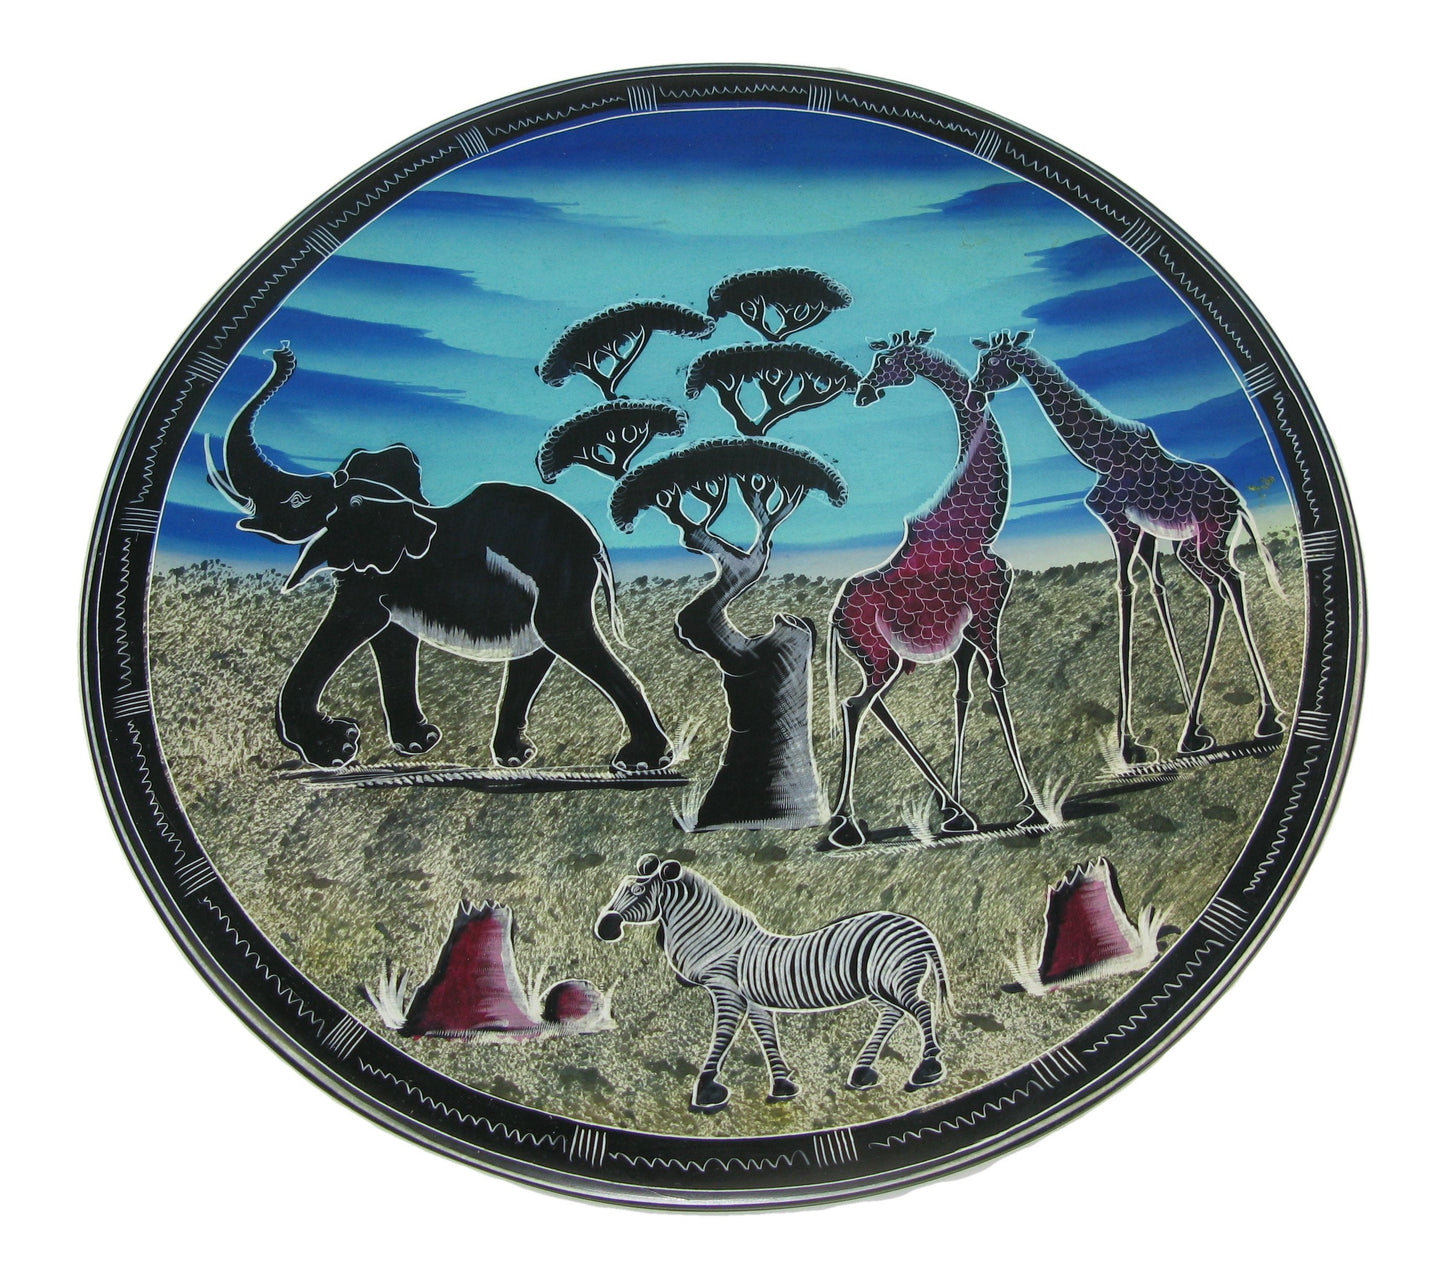 African Savannah - Wildlife Collectable Stone Round Display Plate 12 inch / 30 cm Fair Trade with Story-card